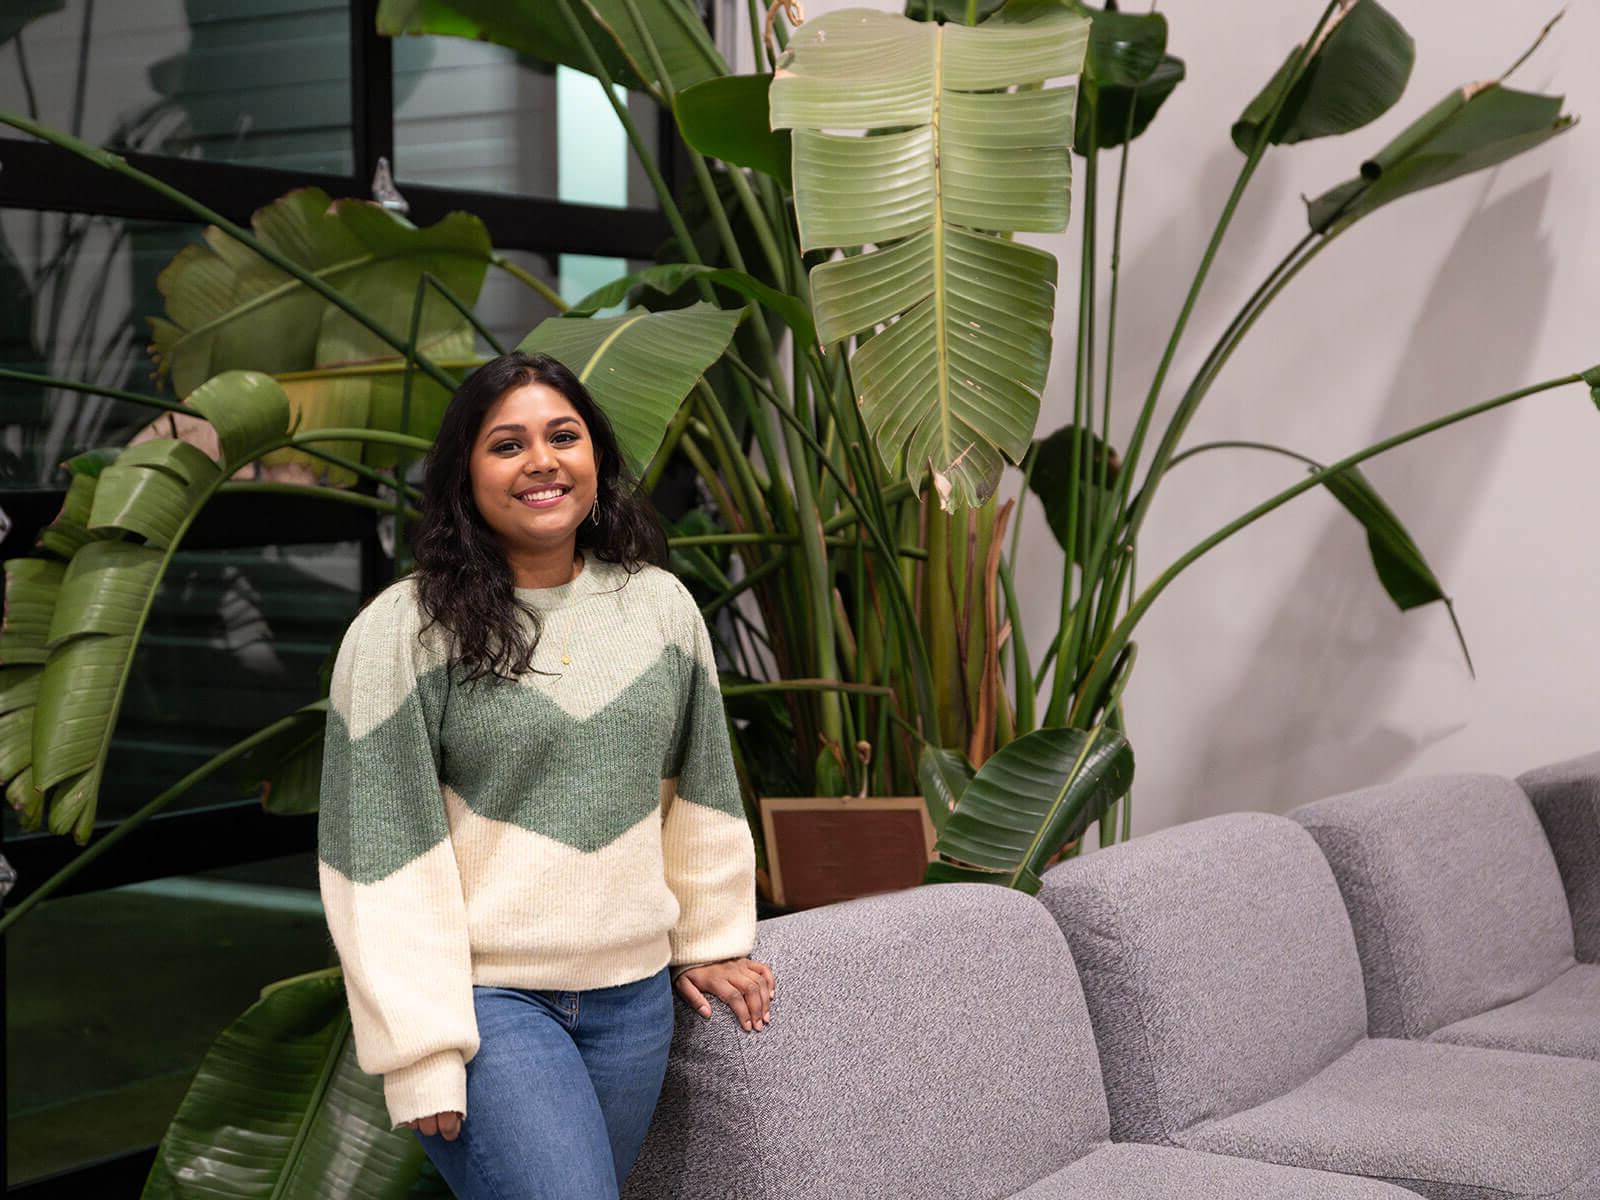 DigiPen graduate Neha Chintala smiles standing next to a couch and some large, leafy plants.